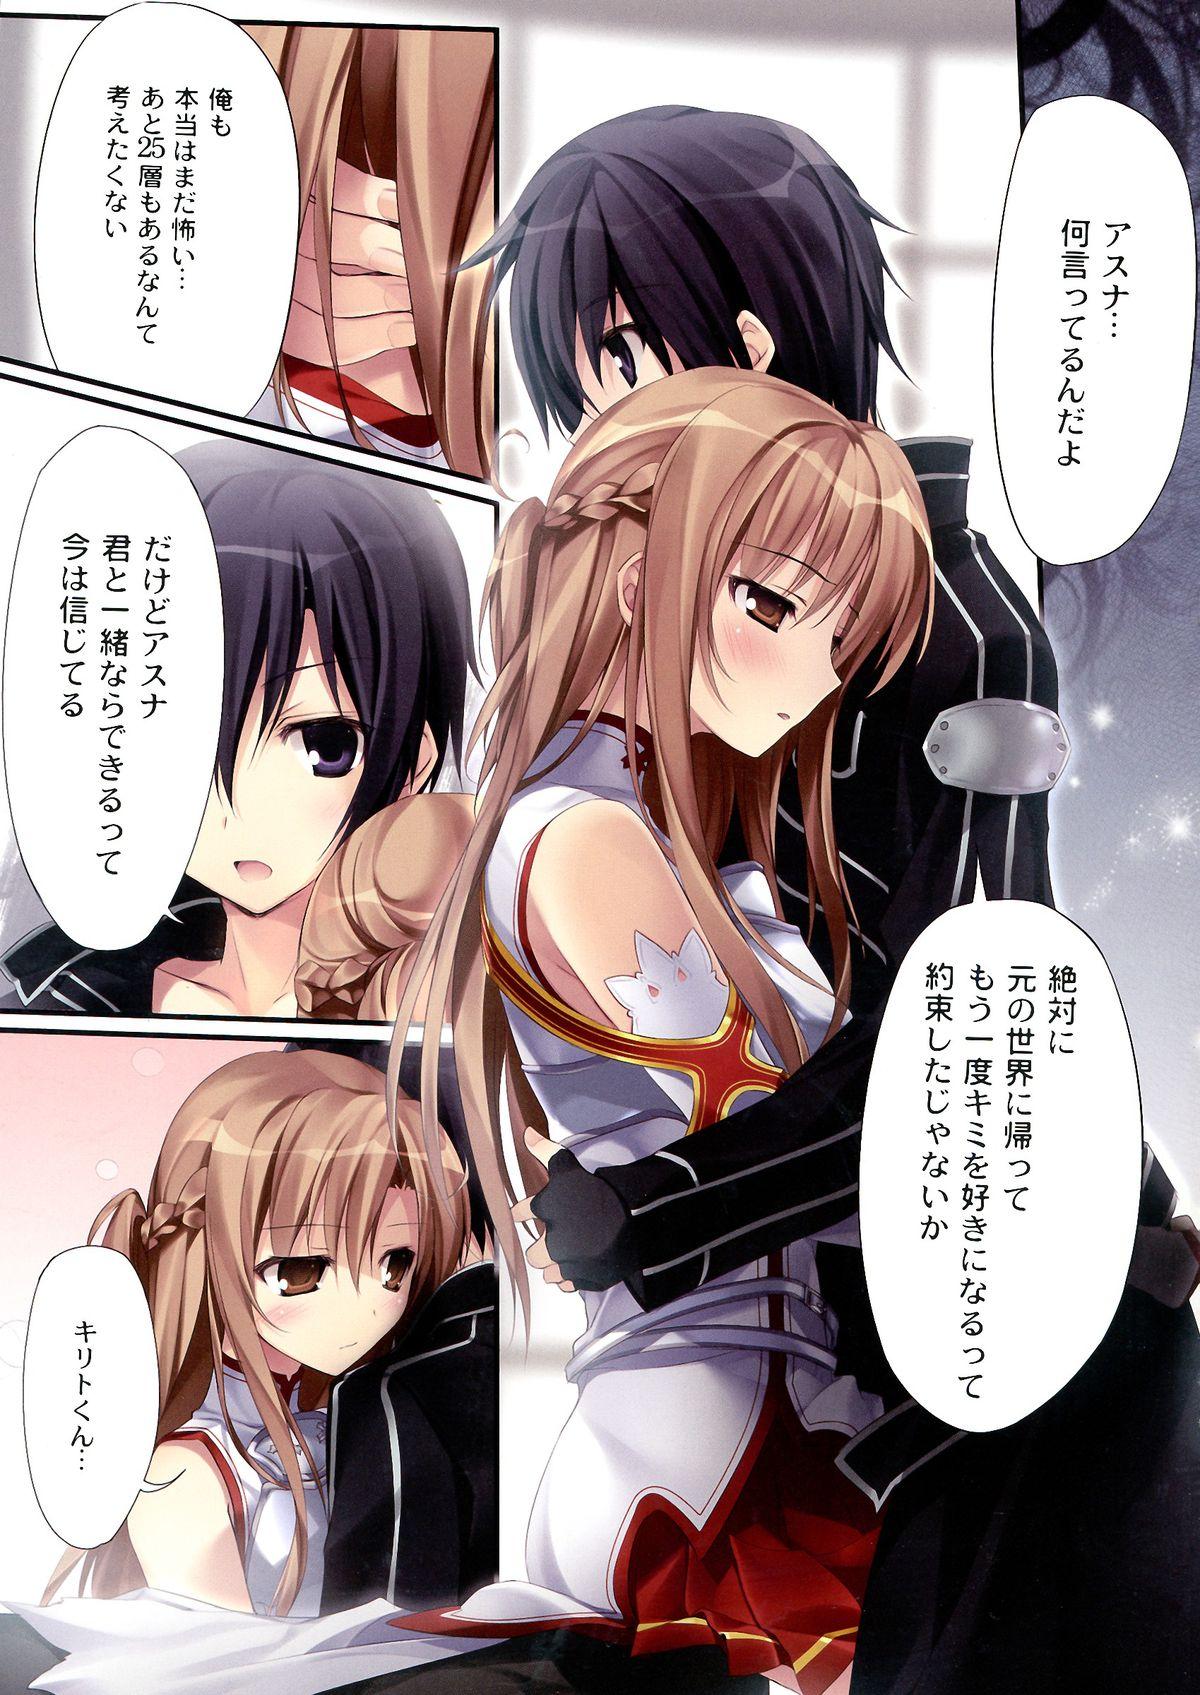 India KARORFUL MIX EX9 - Sword art online Lolicon - Page 5